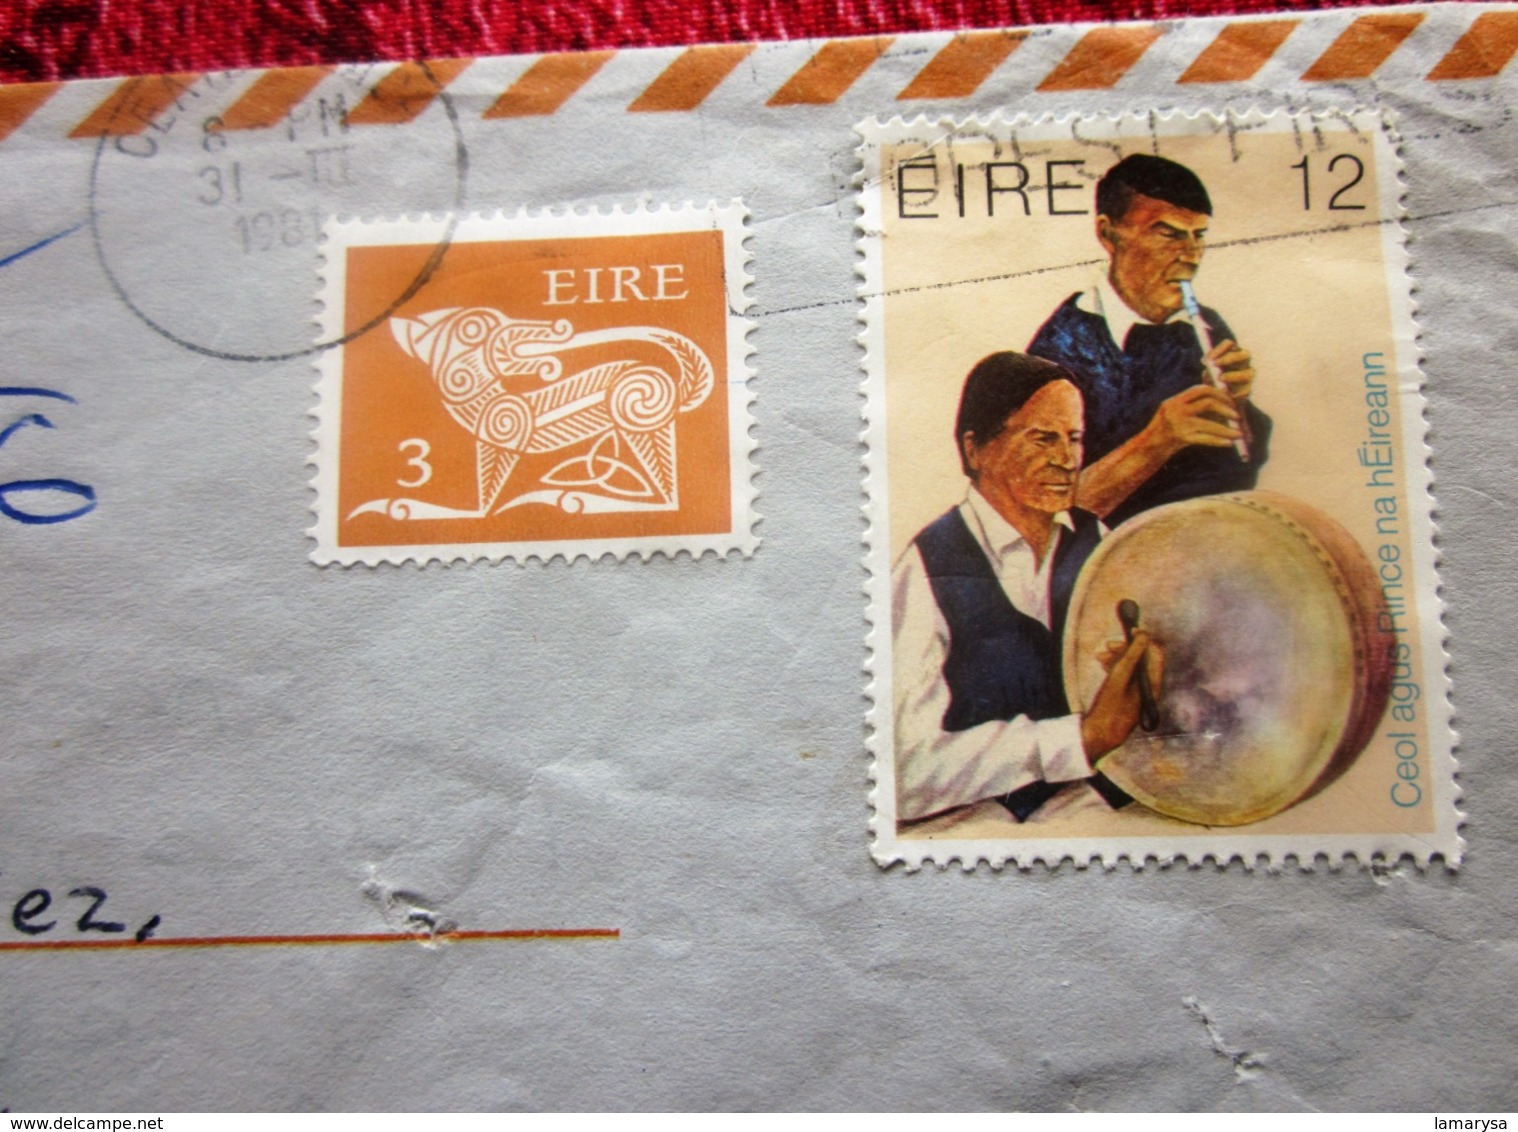 Timbres  Europe  Irlande  Poste Aérienne  Aérogramme  EIRE IRLAND ​​​​​​​  Lettre & Document 1980 - Airmail